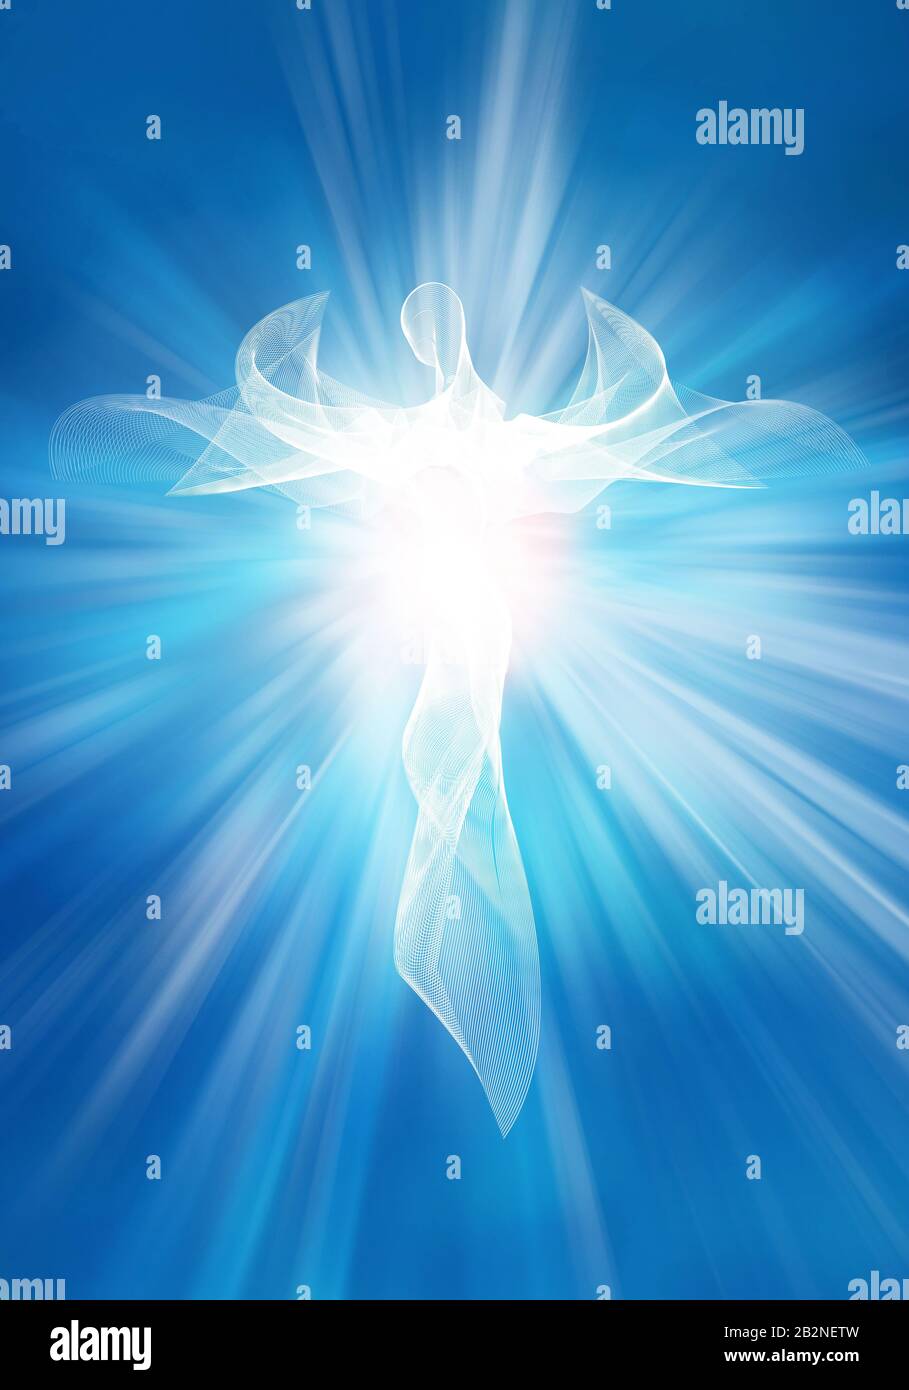 Illustration modern abstract white angel in sky with bright light rays. Heaven. Blue background Stock Photo